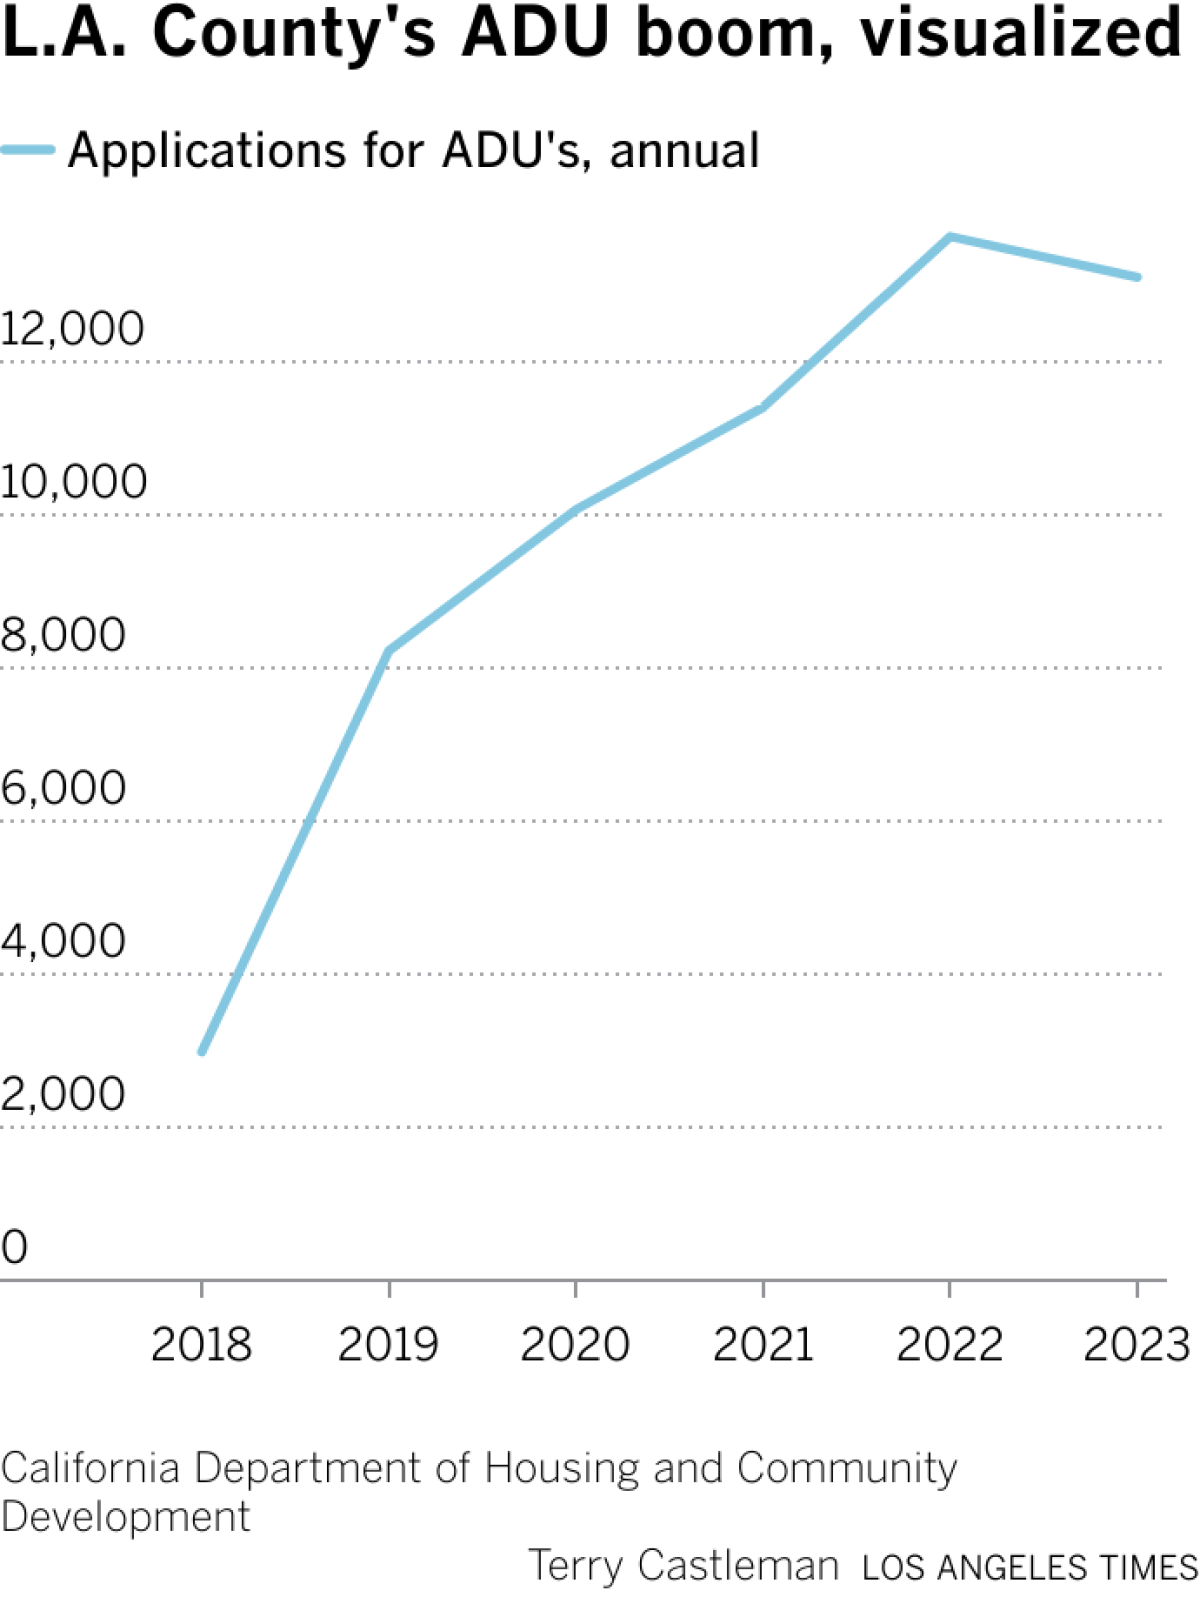 Chart shows growing levels of ADU permit applications from 2018 to 2023